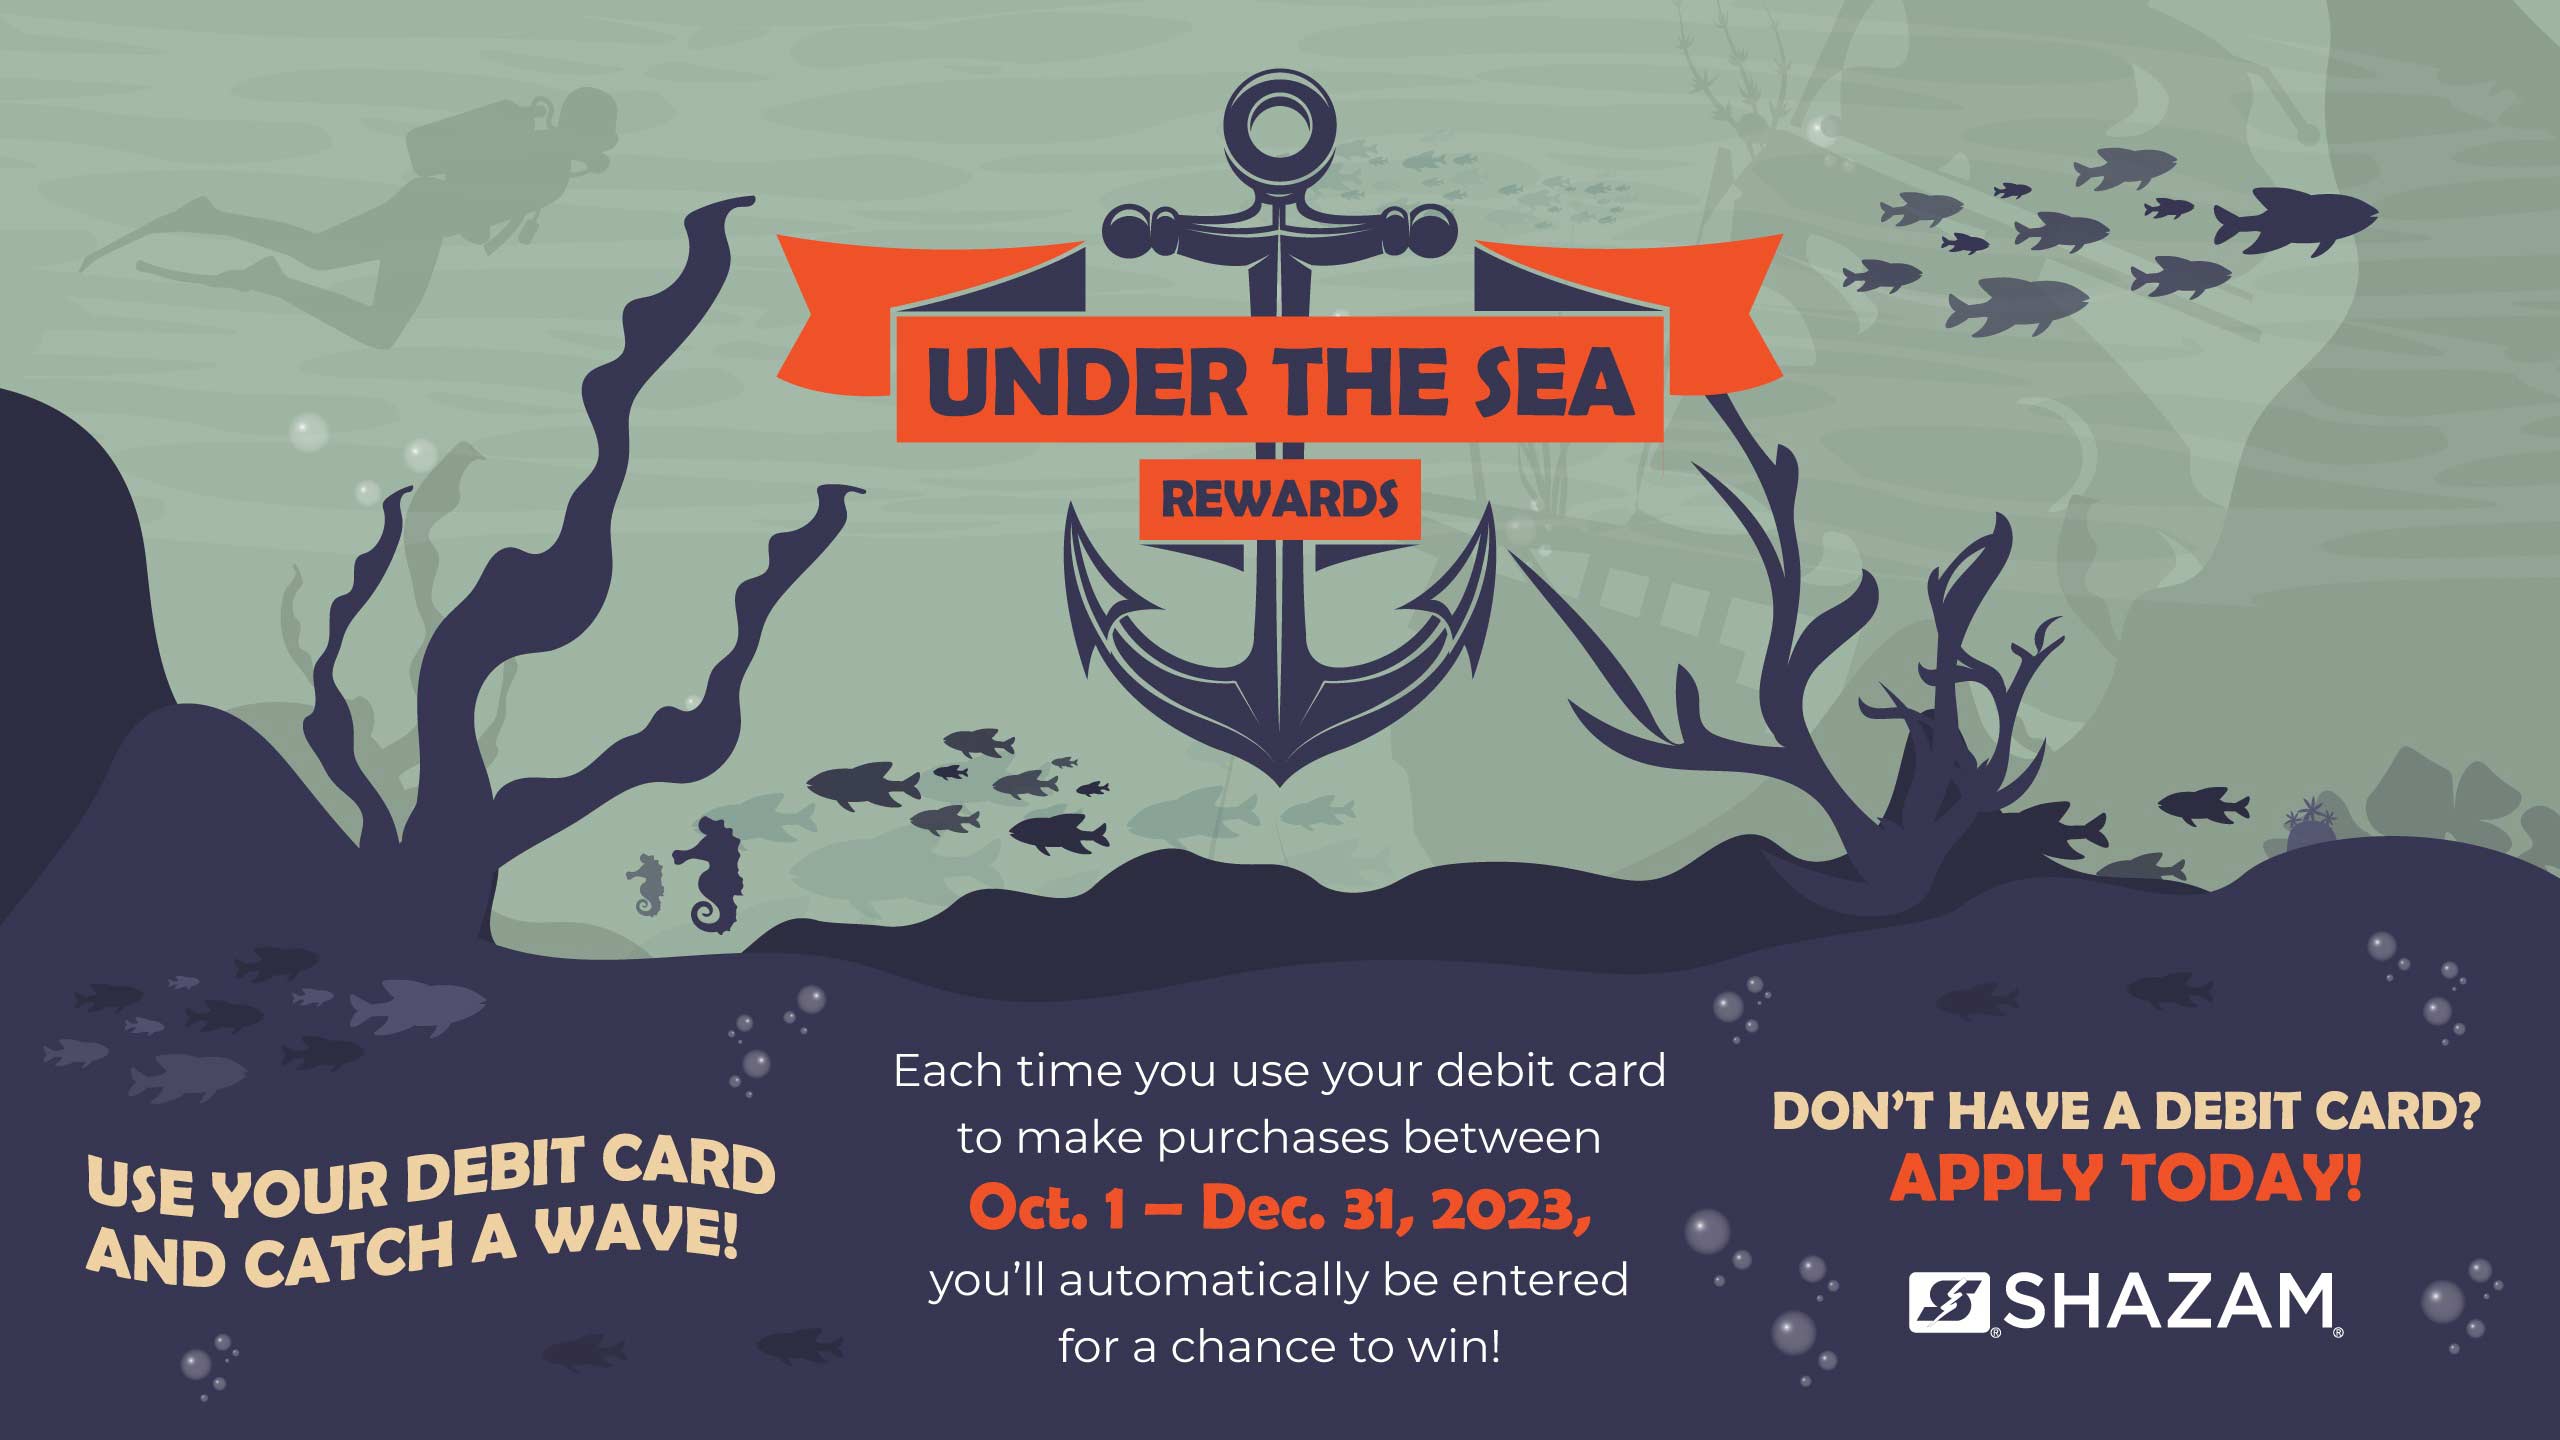 Under the Sea Rewards! Use your debit card and catch a wave. Each time you use your debit card to make purchases between October 1 - December 31, 2023 you'll automatically be entered for a chance to win! Don't have a debit card? Apply today! width=